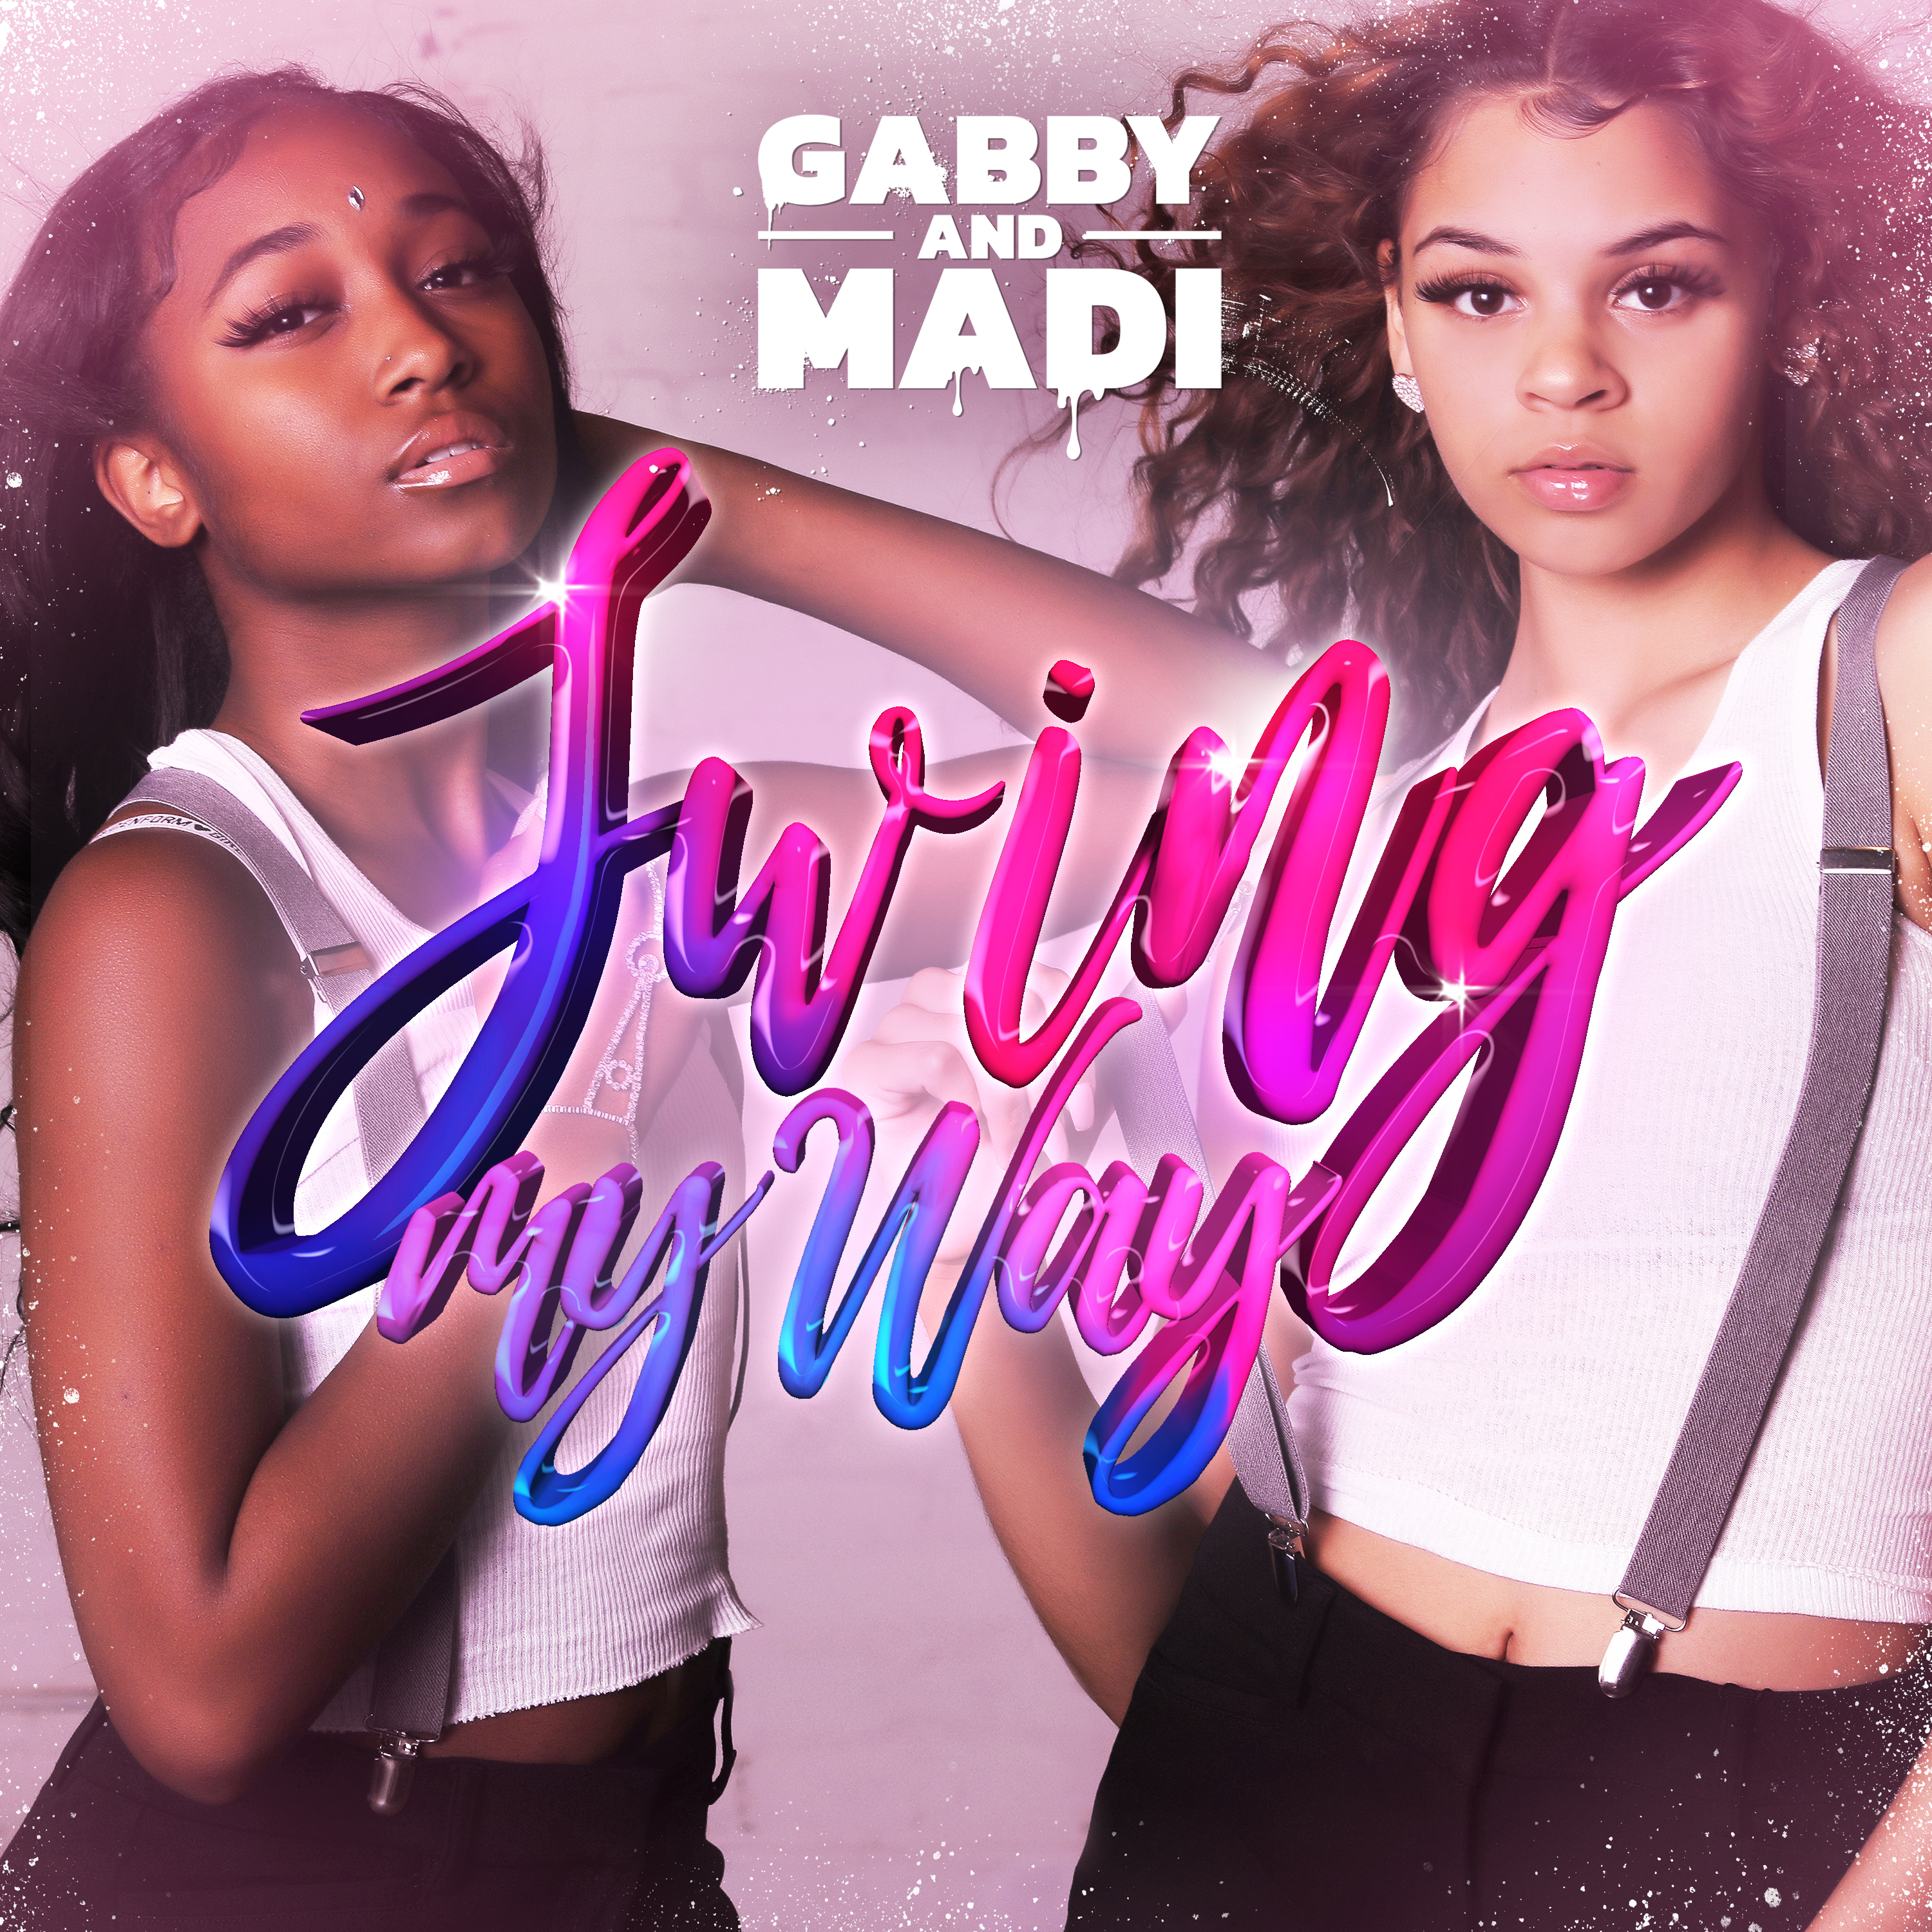 Gabby and Madi Re-Imagine Classic with “Swing My Way”